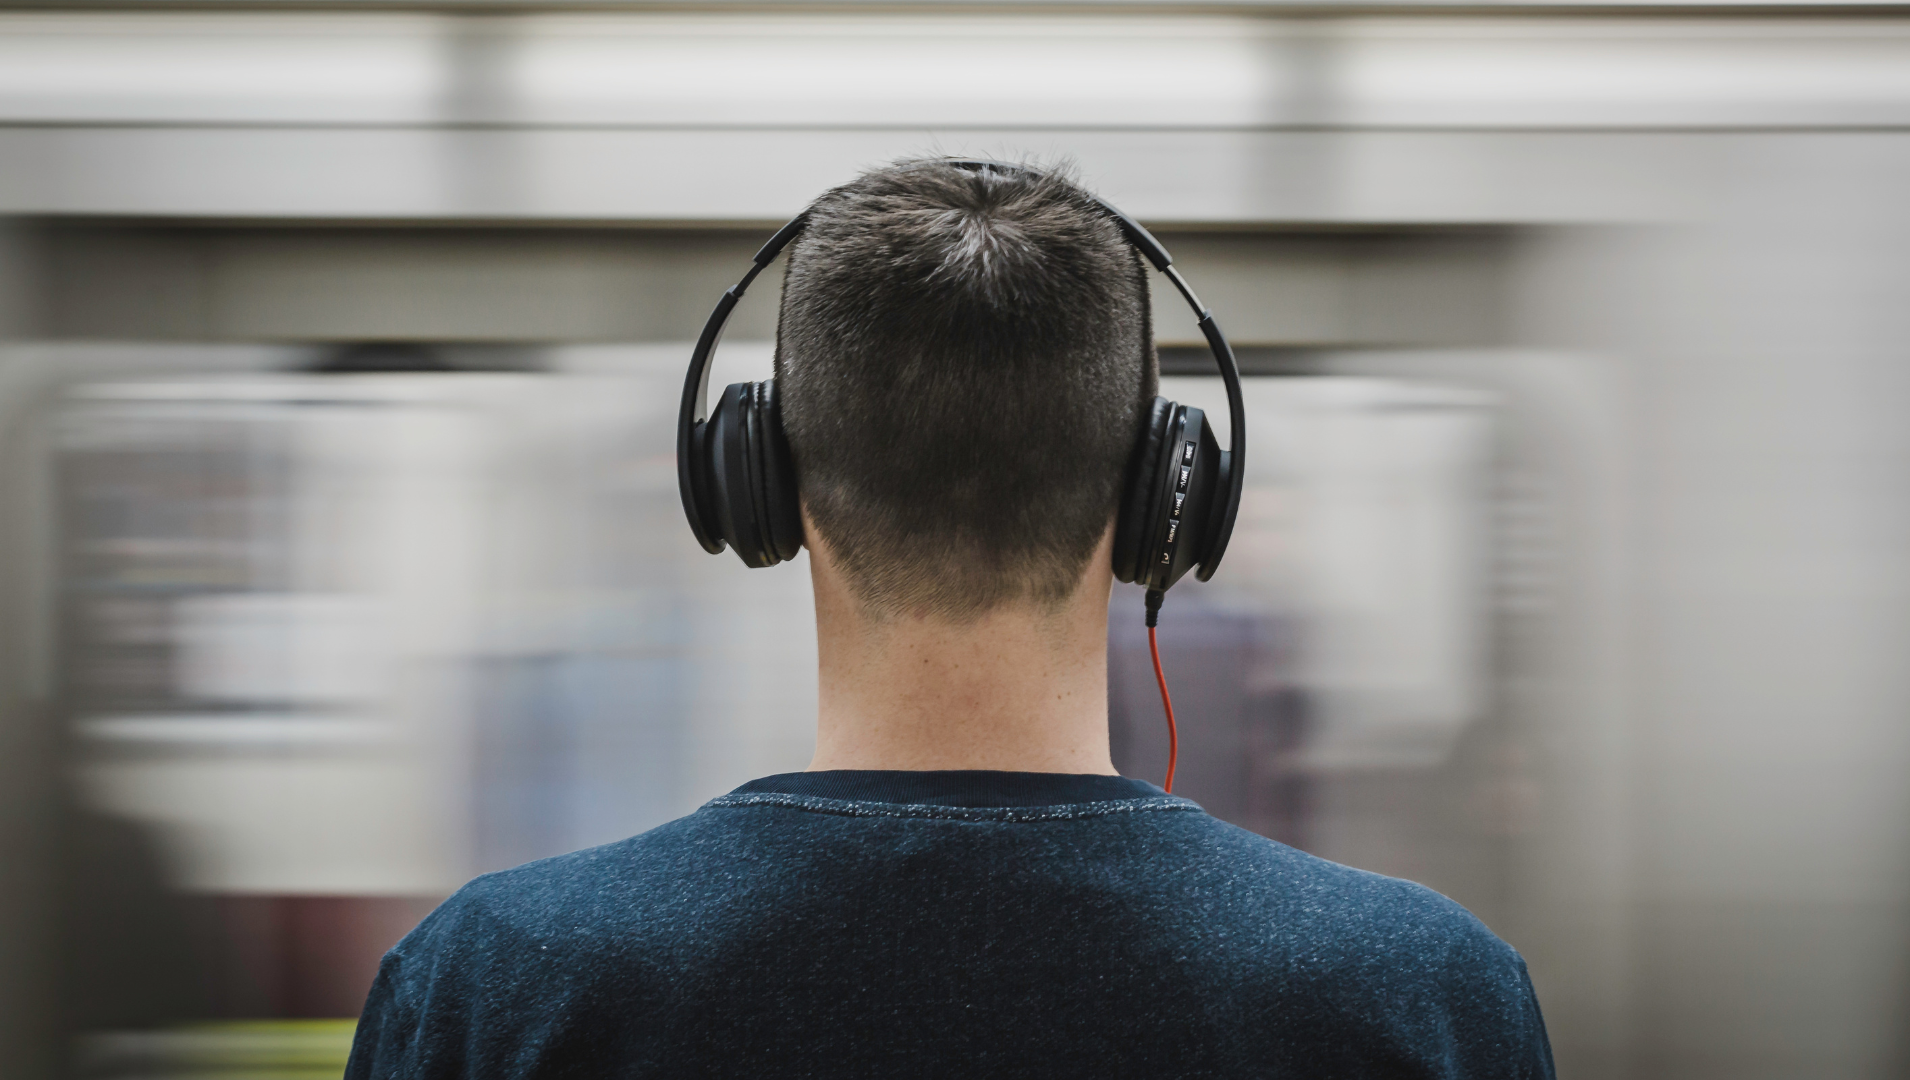 Man wearing noise cancelling headphones amidst a busy environment